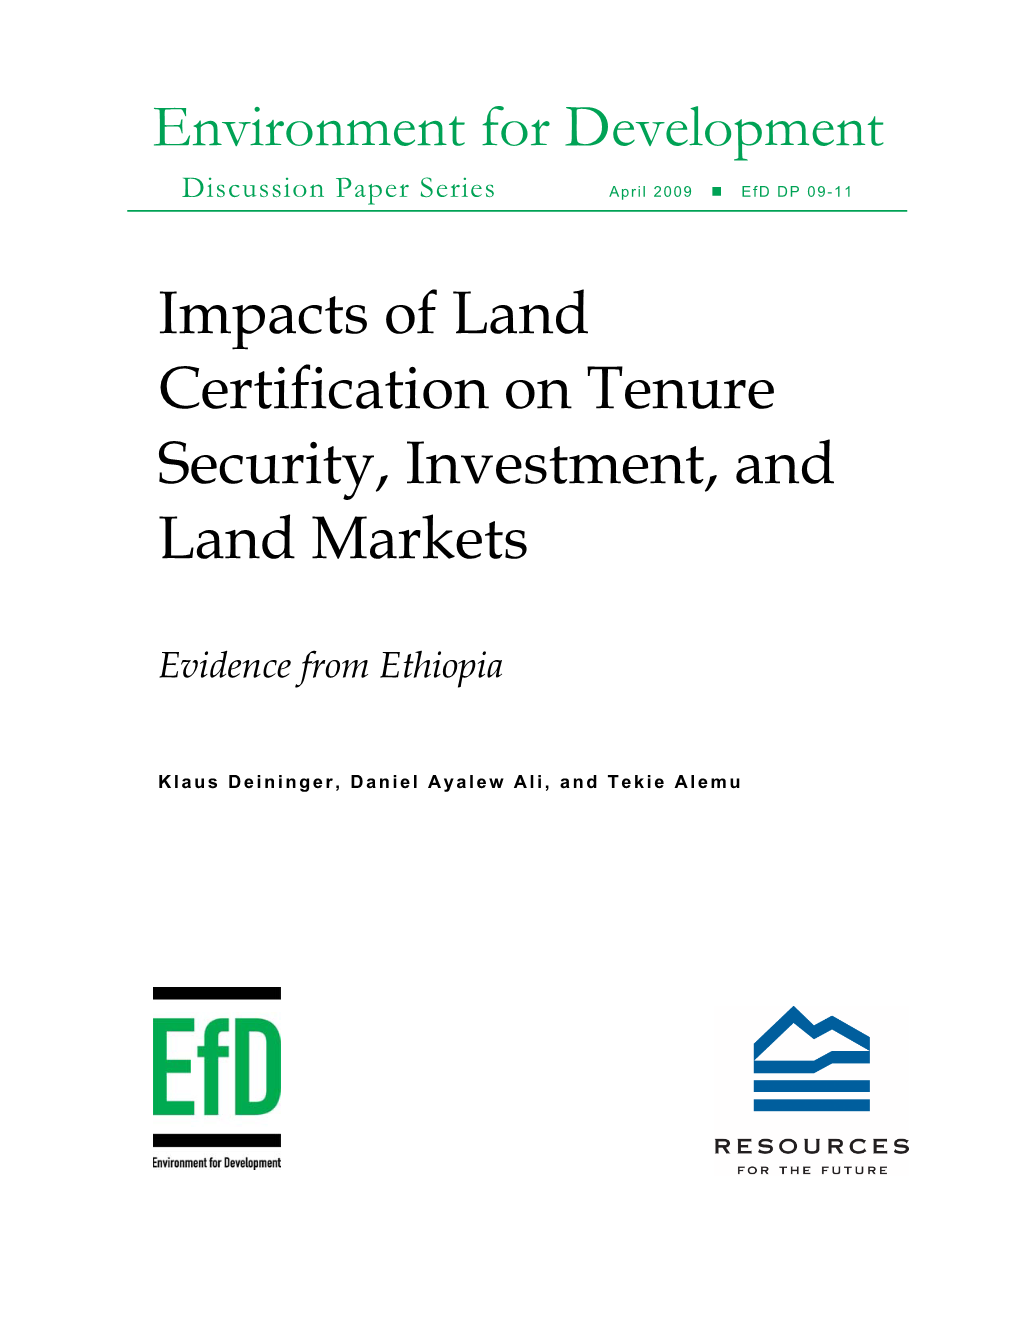 Impacts of Land Certification on Tenure Security, Investment, and Land Markets